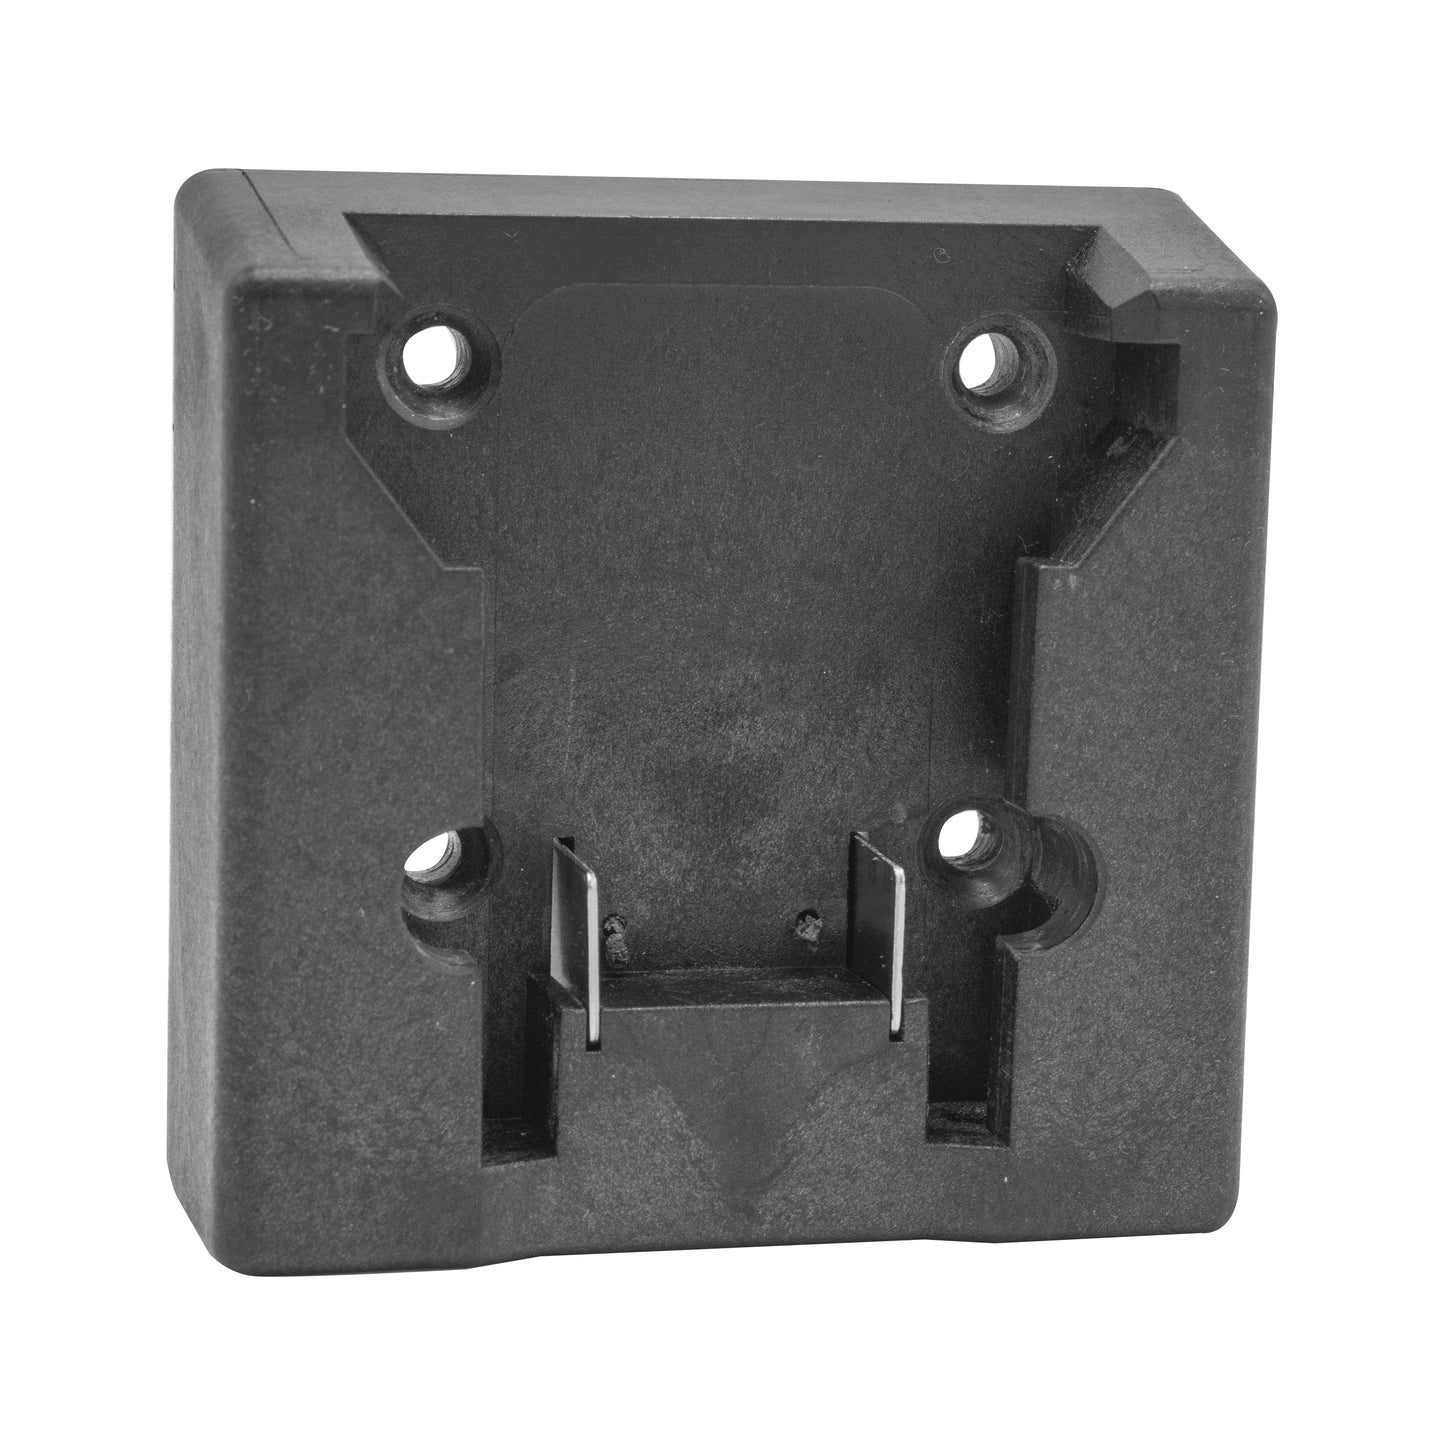 CPAPMIL - Pump Stick Battery Adapter Plate for Milwaukee Batteries